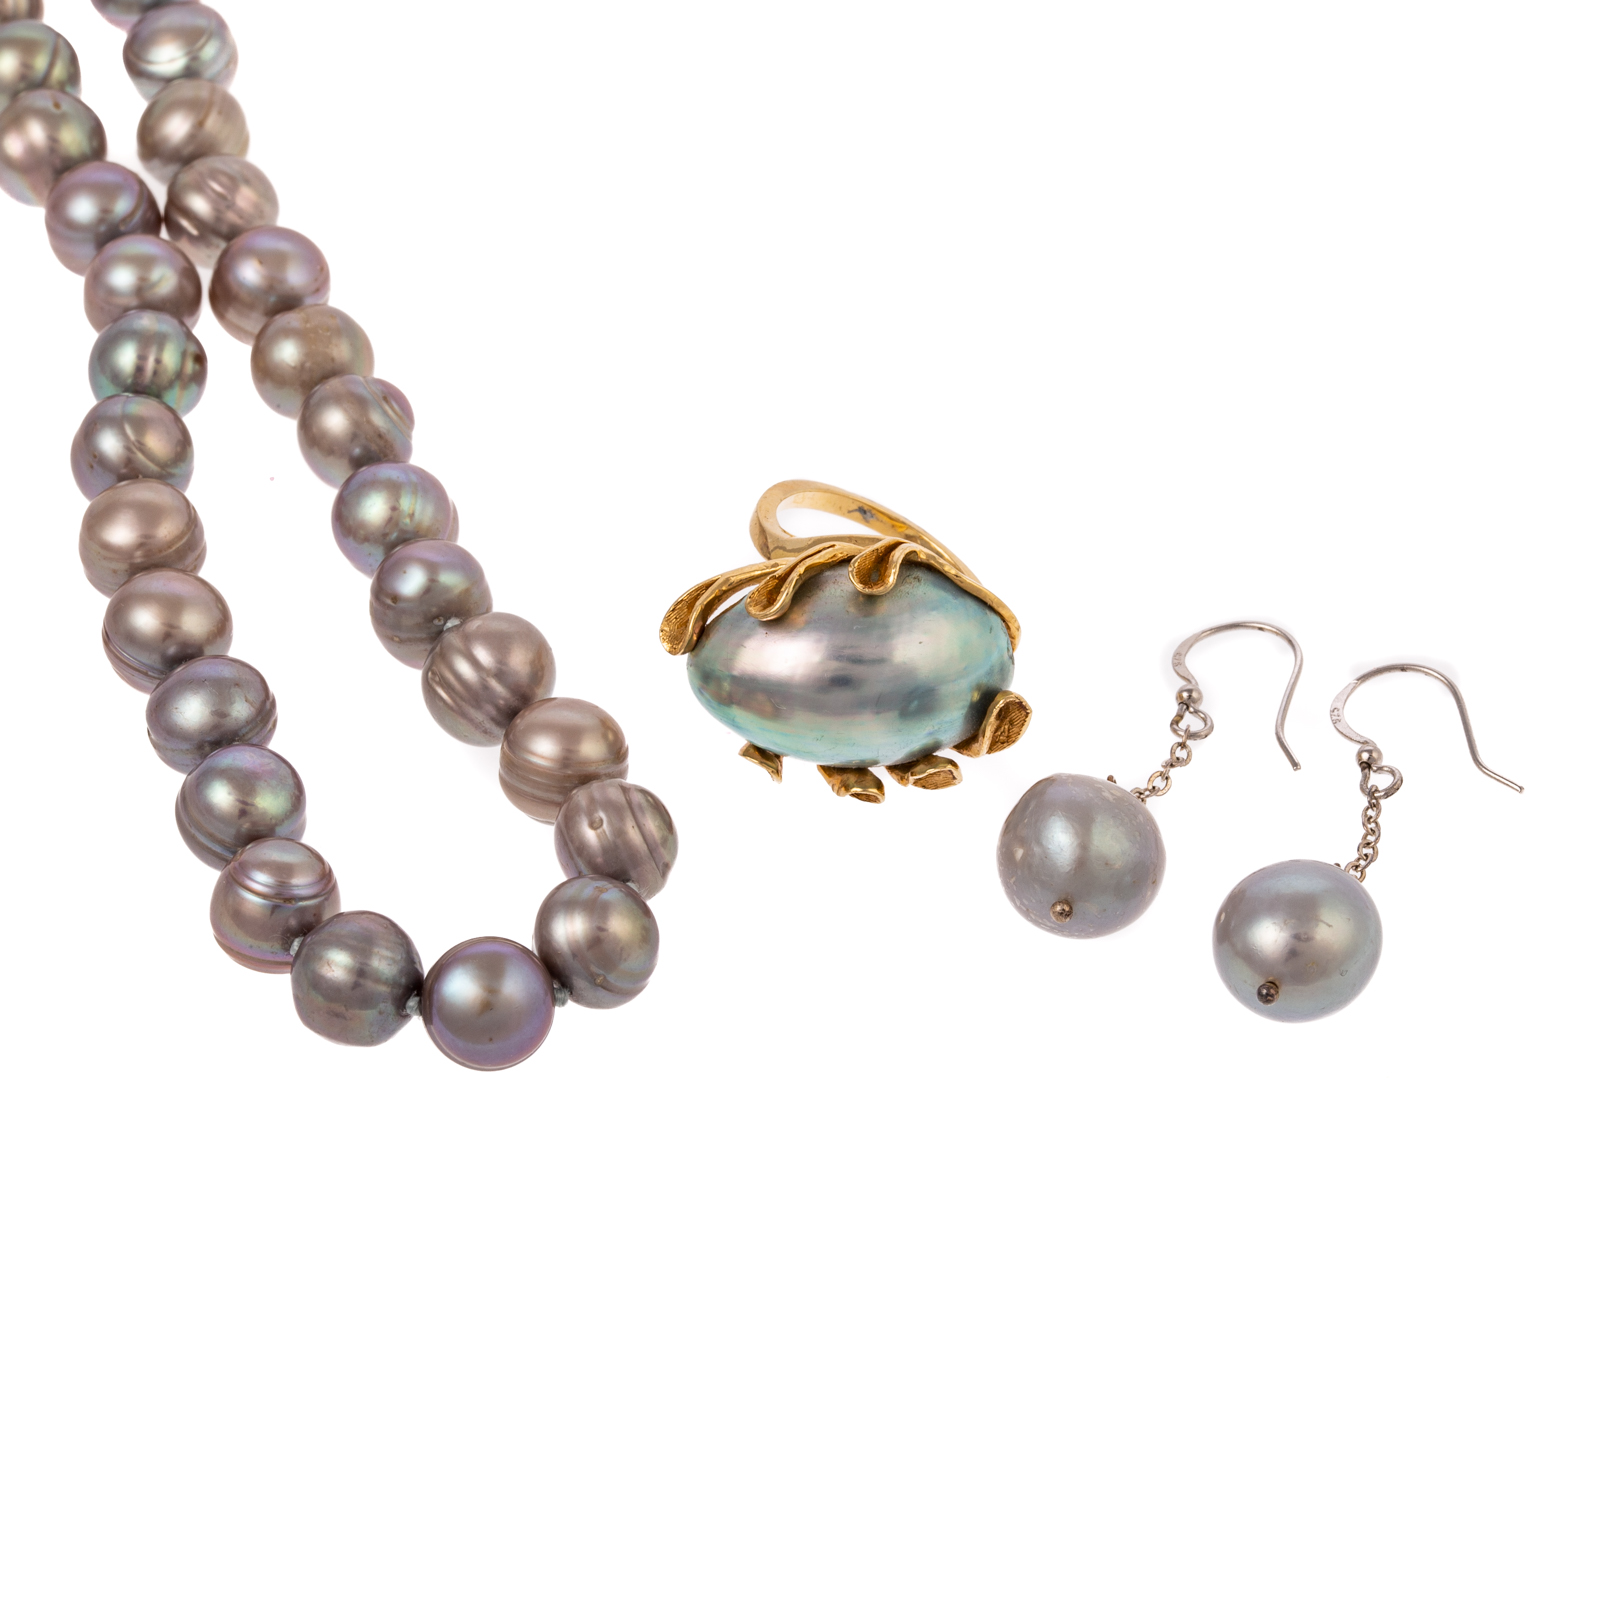 COLLECTION OF GRAY PEARL JEWELRY